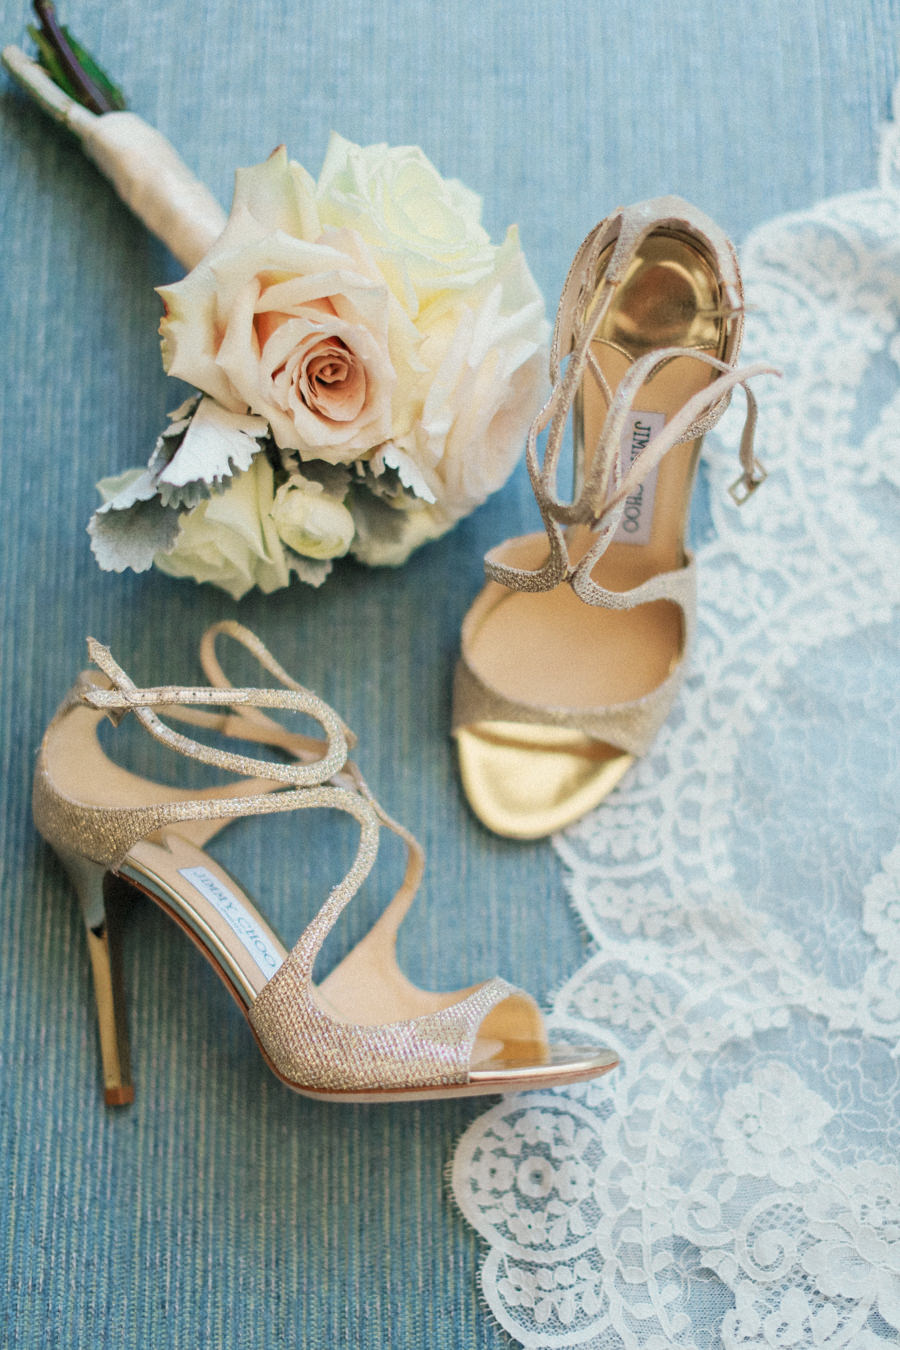 Bridal Champagne Gold Open Toed Jimmy Choo Wedding Shoes with Bridal Bouquet Portrait